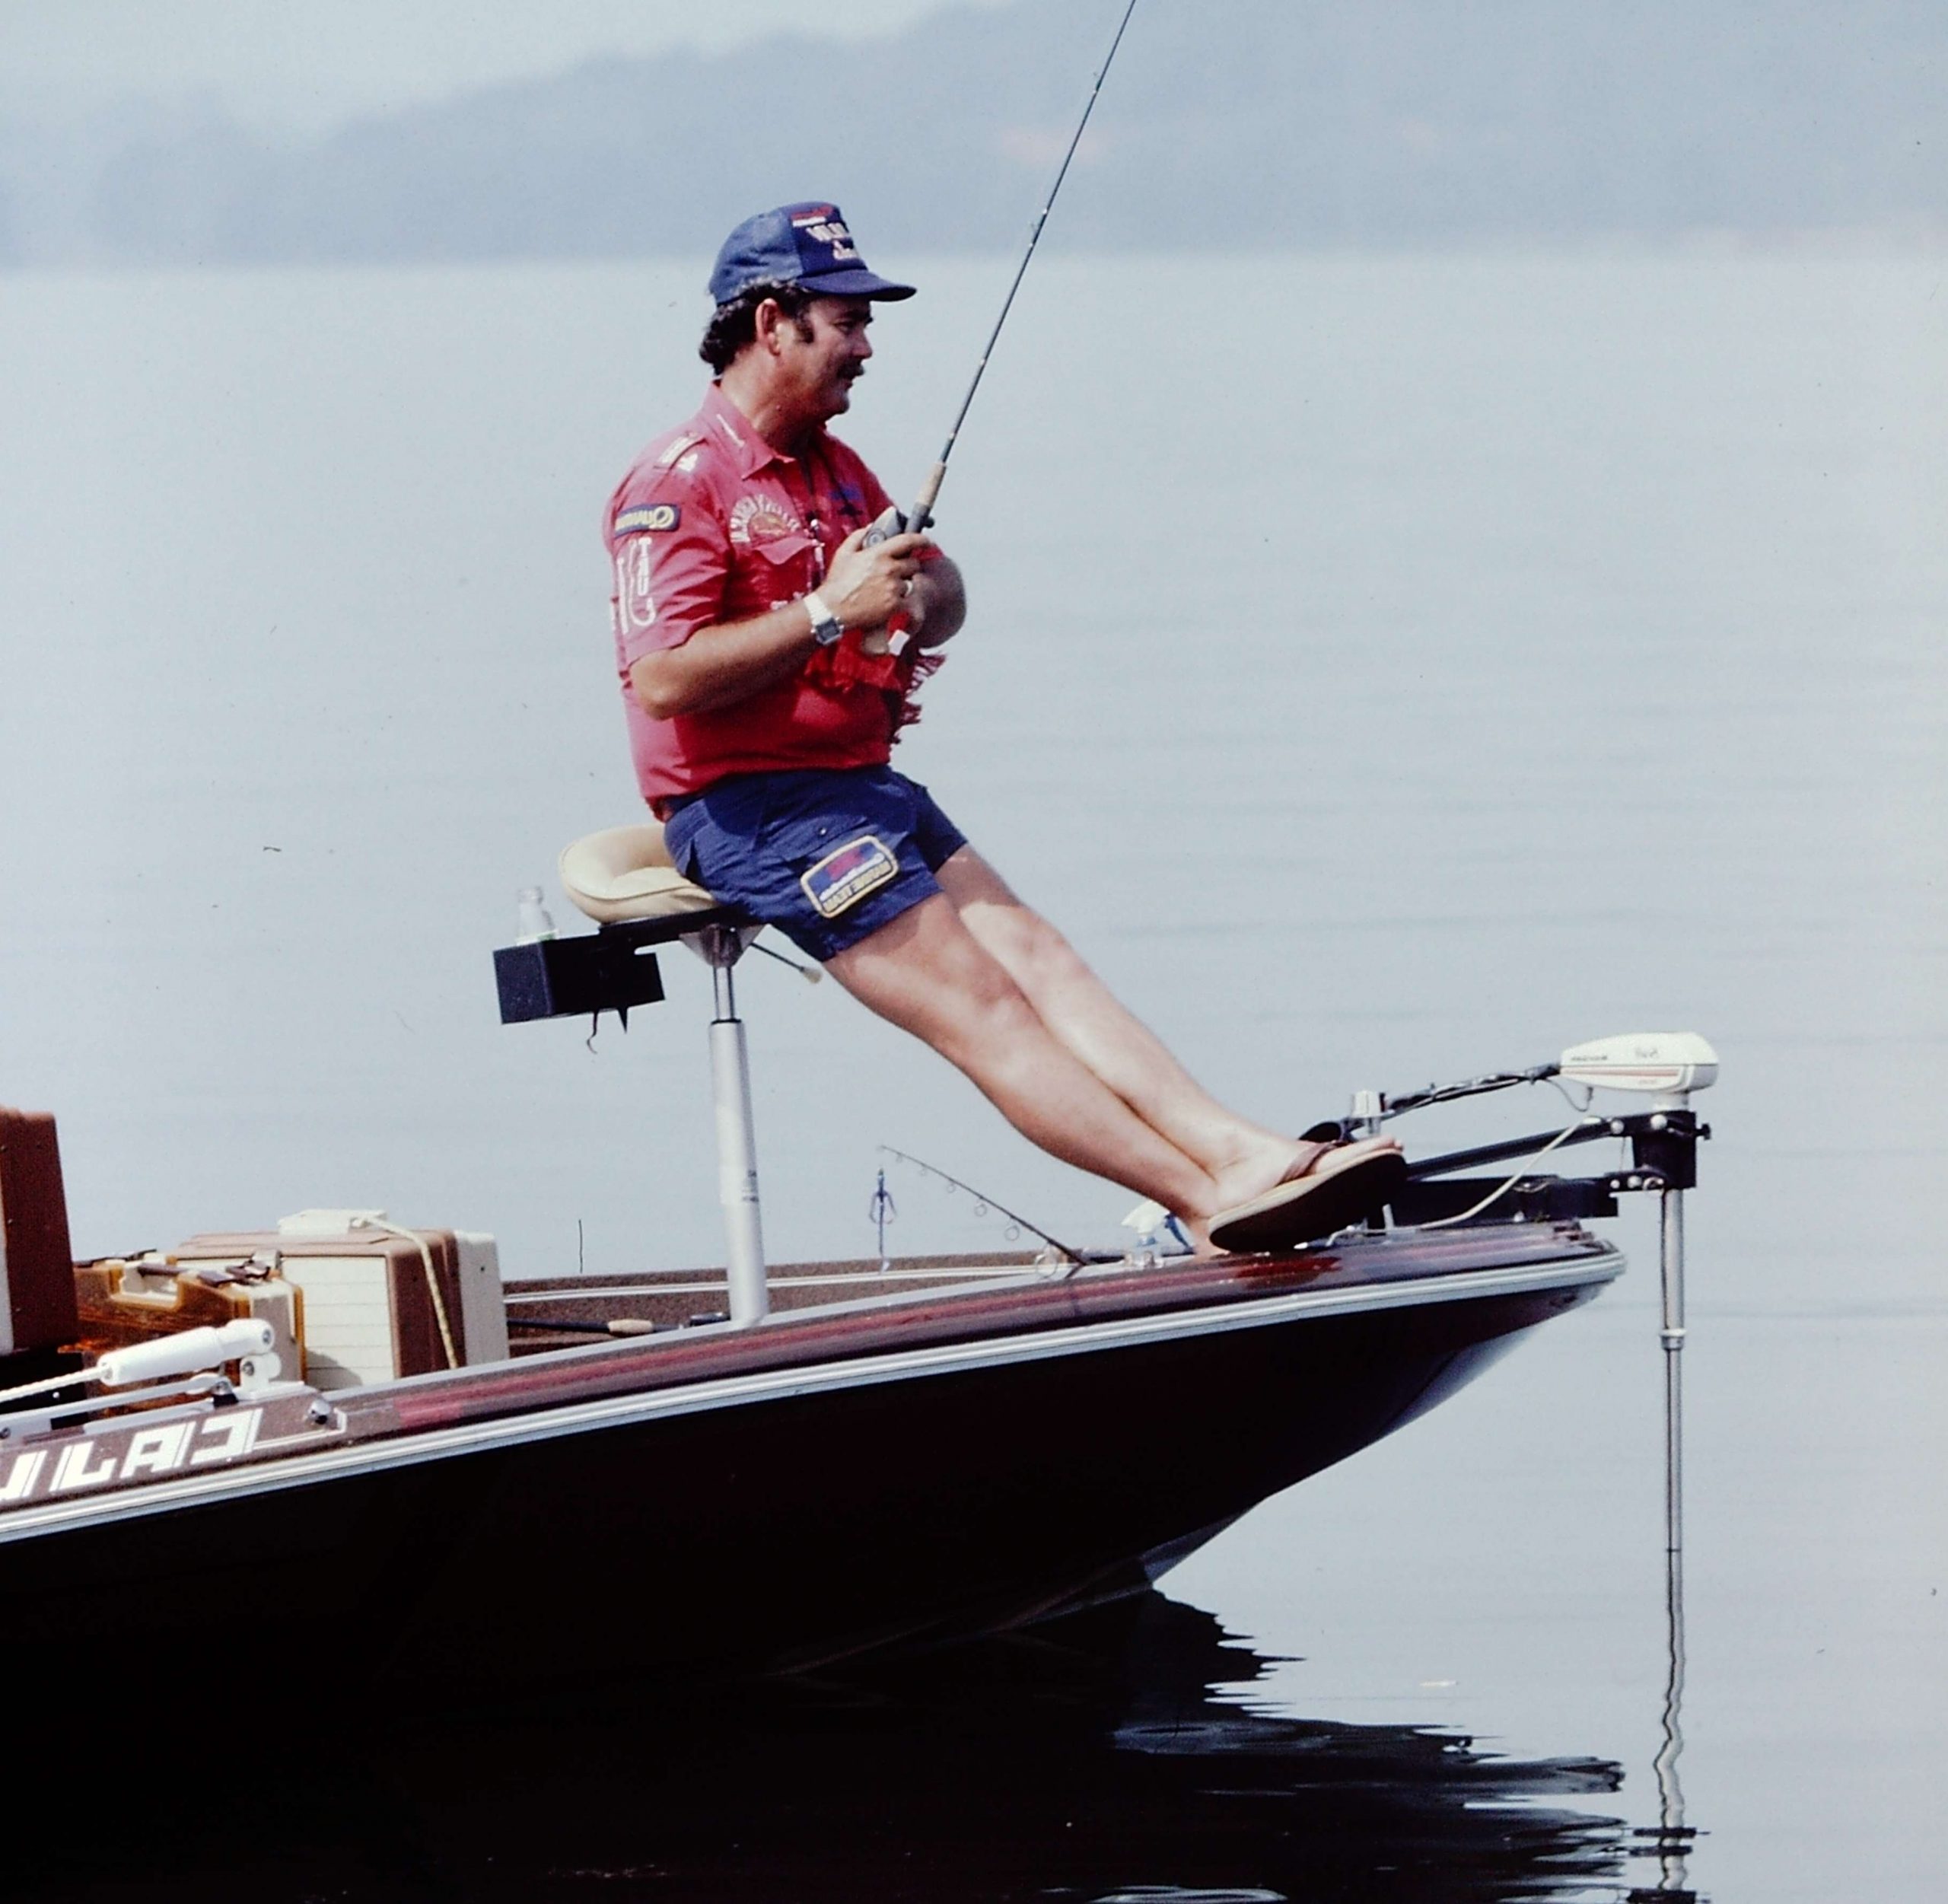 Ricky Green, who died just last month, was a bass fishing veteran by the 1986 tournament on Chickamauga. His performance at Chickamauga was not amazing â 39th place â but he had already won more than $100,000 in previous B.A.S.S. tournaments, mainly in the 1970s when payouts werenât very high.